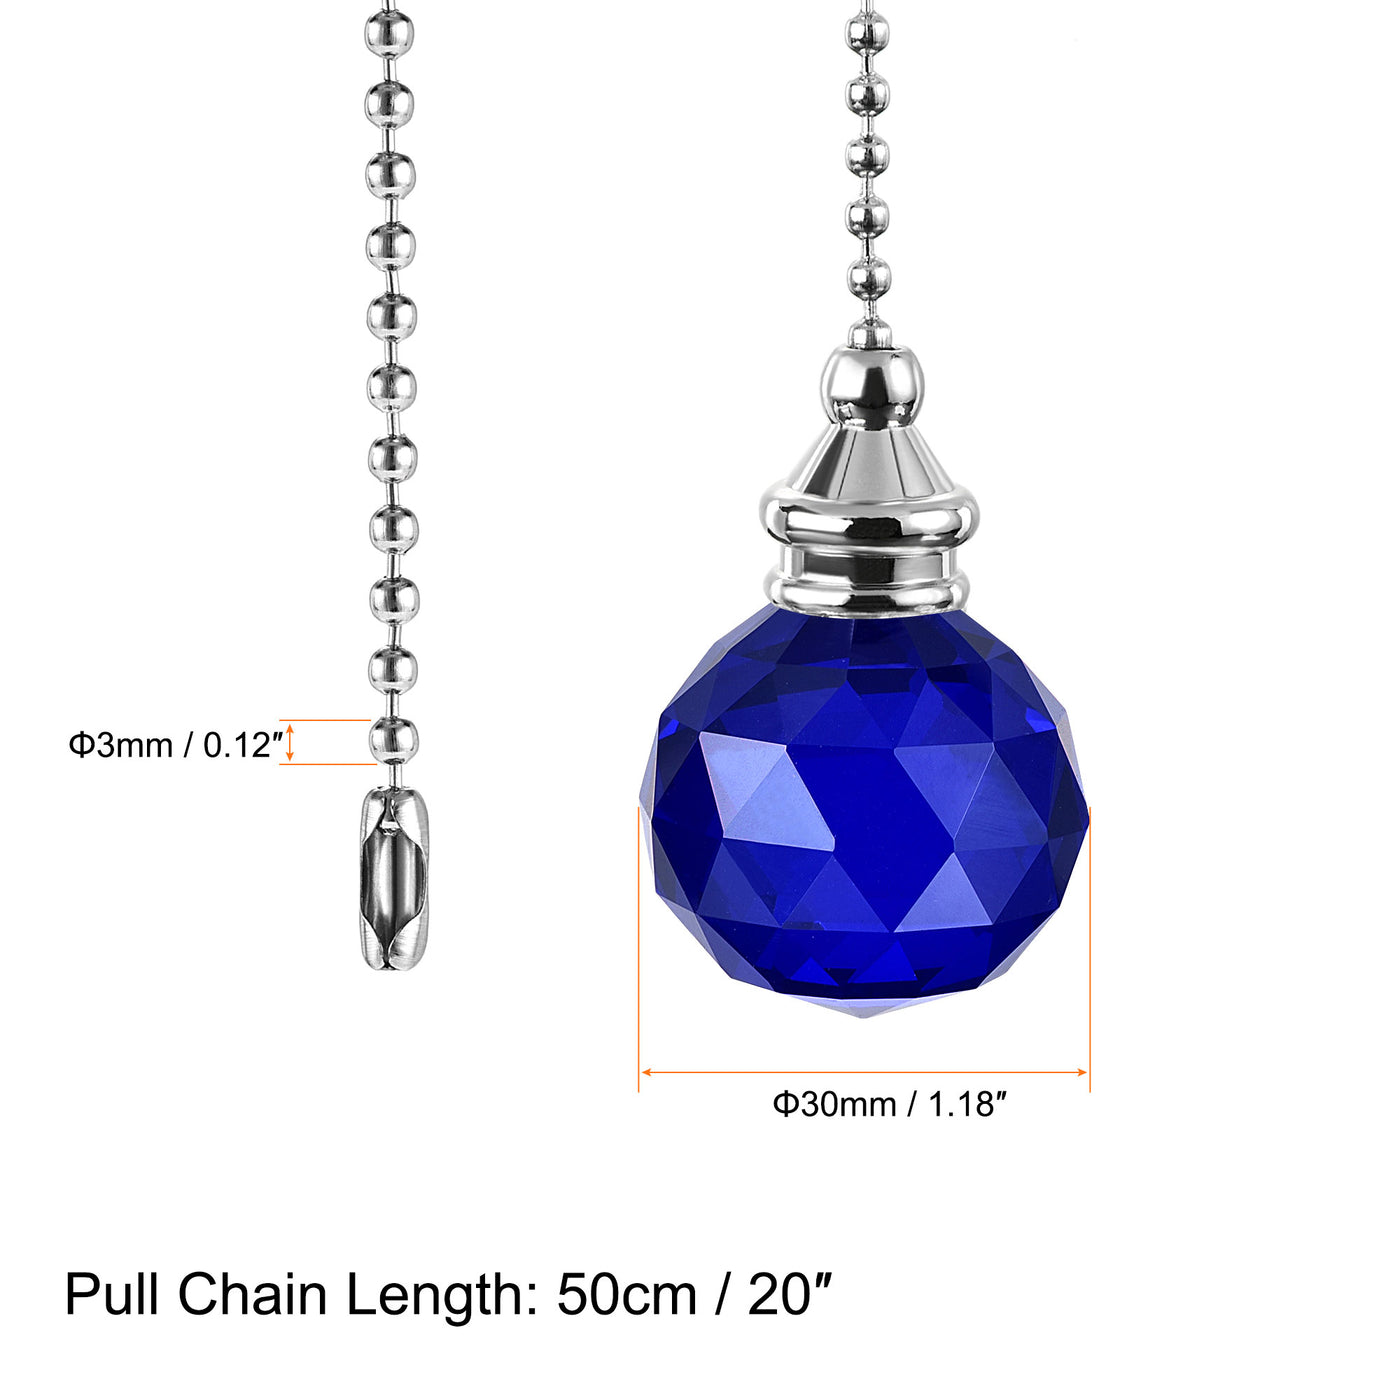 uxcell Uxcell Ceiling Fan Pull Chain, 20 Inch Nickel Finish Chain Ornament Extension, 30mm Blue Crystal Ball Pendant